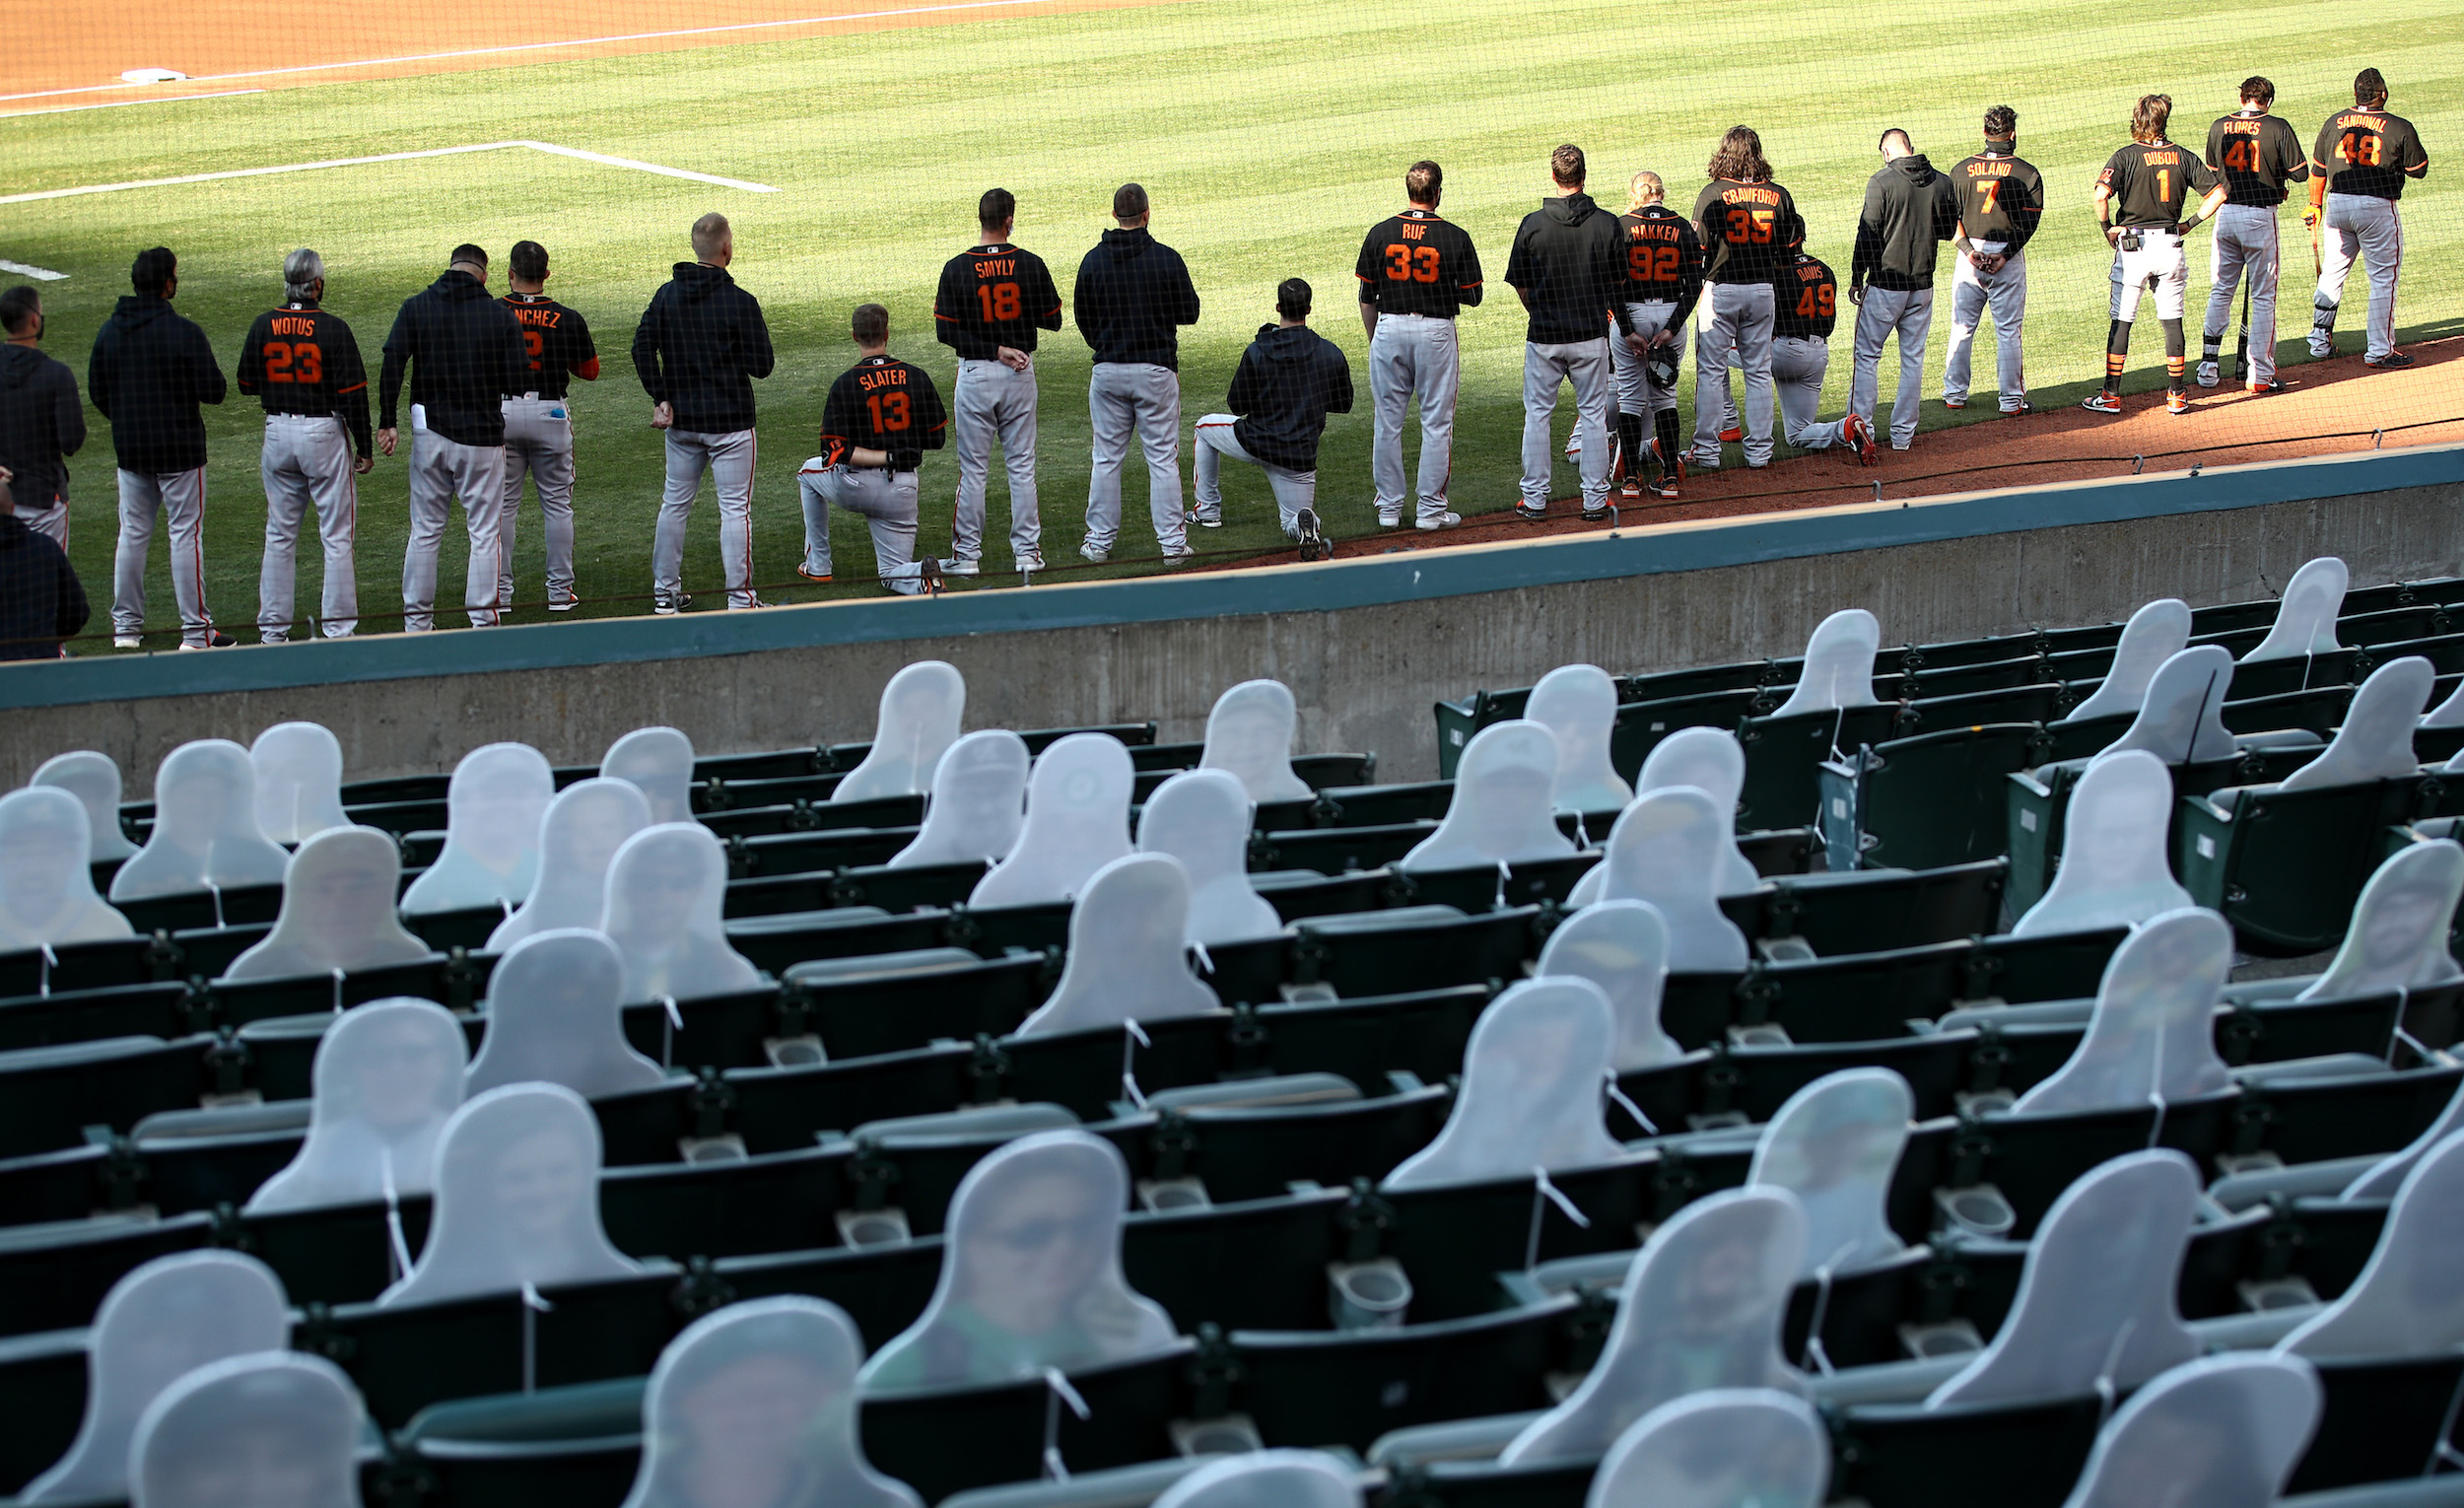 Aubrey Huff and Donald Trump Are Still Missing the Point of the San Francisco Giants Kneeling for the National Anthem